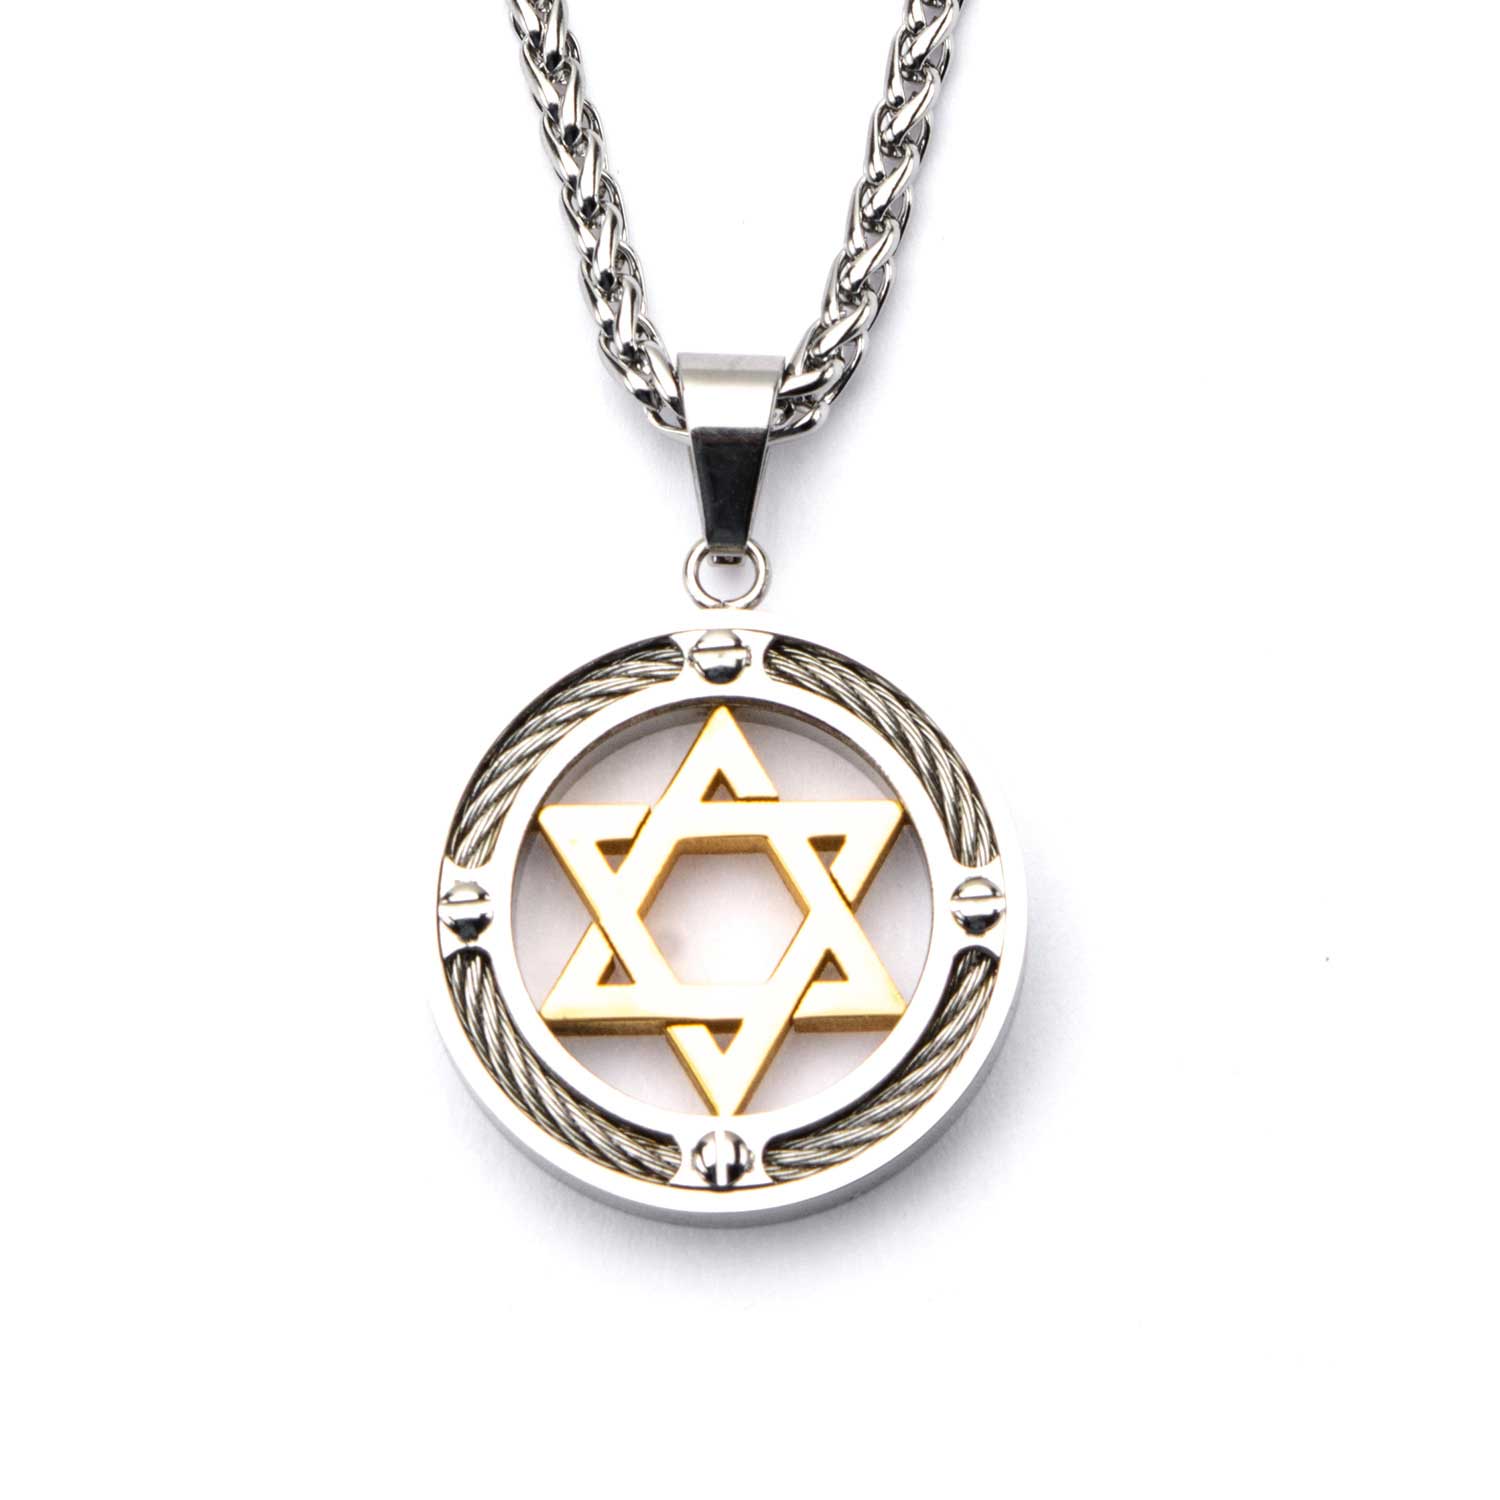 Steel Gold Plated Star of David with Cable Inlayed in Circle Pendant Carroll / Ochs Jewelers Monroe, MI